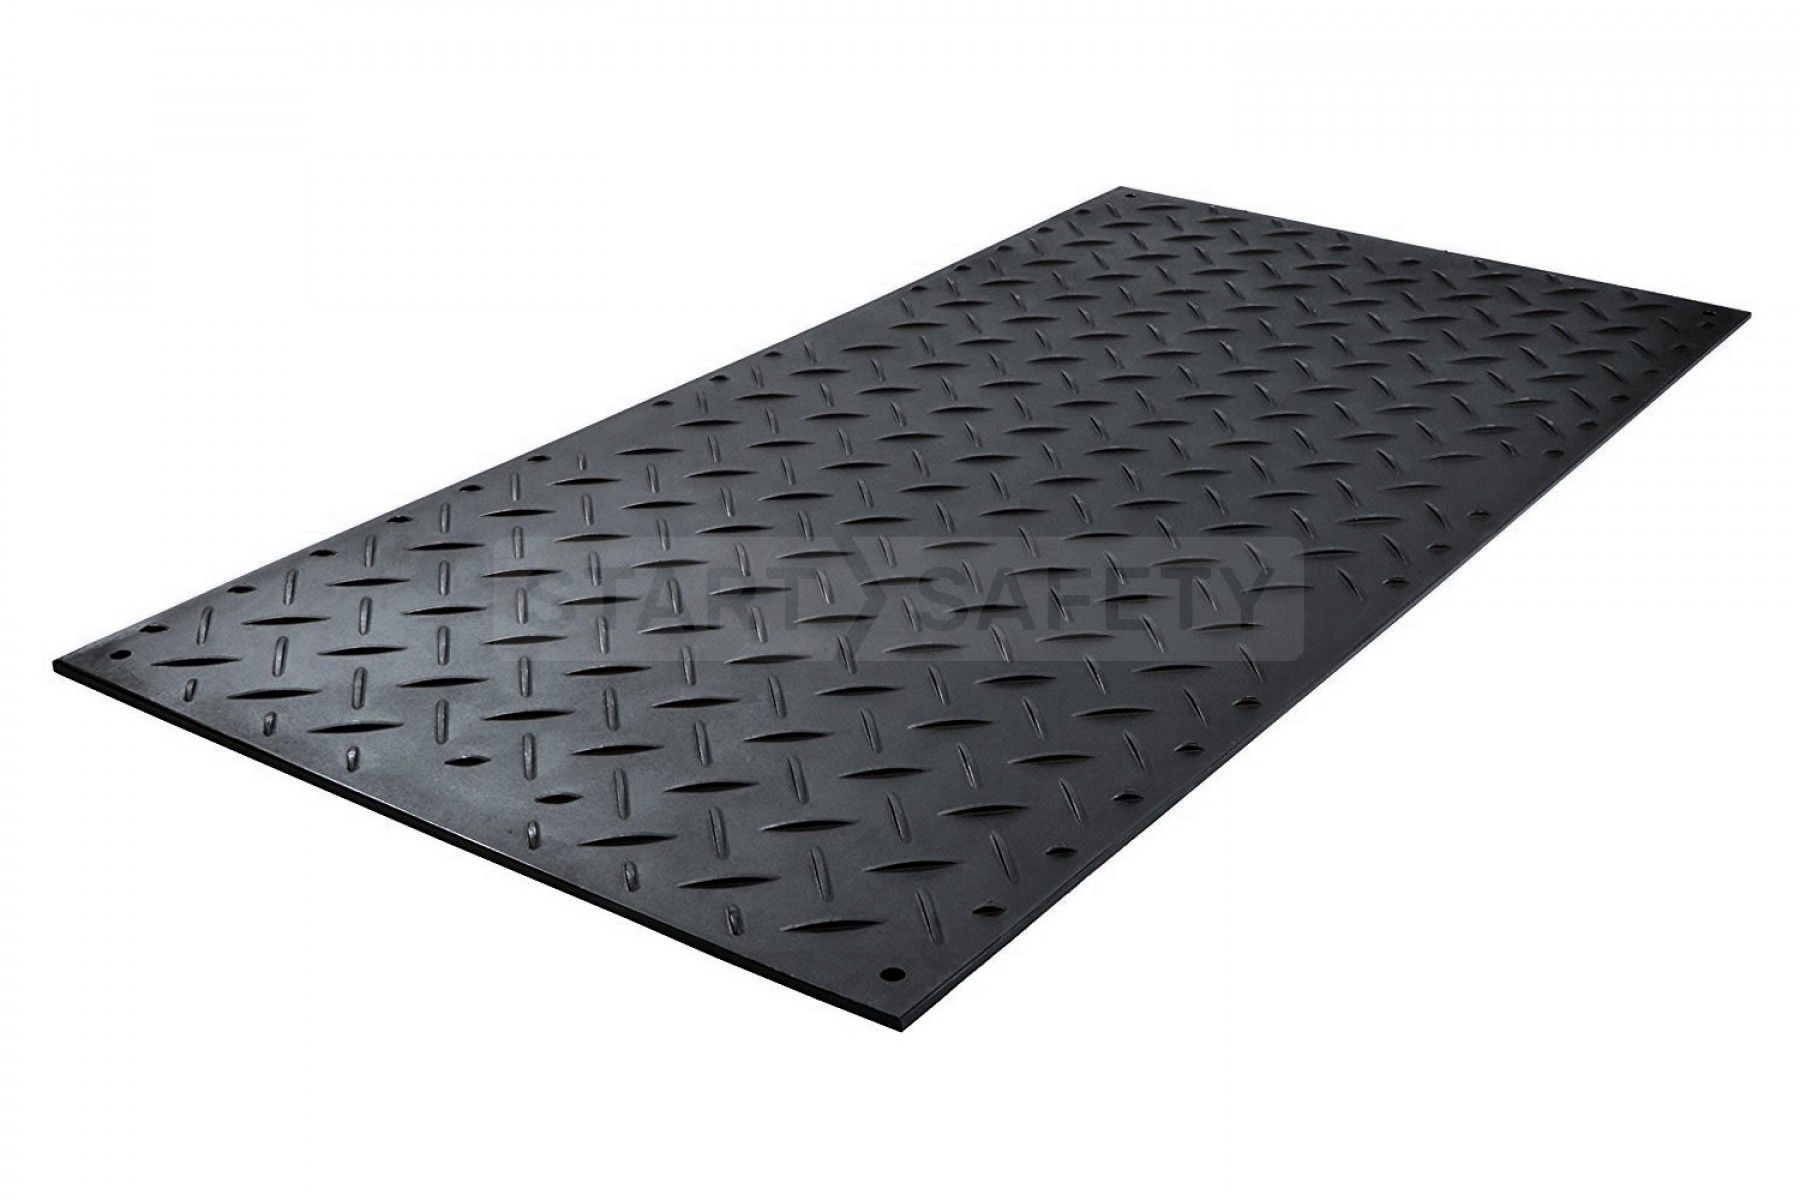 AlturnaMATS® - The Best Ground Protection Mat